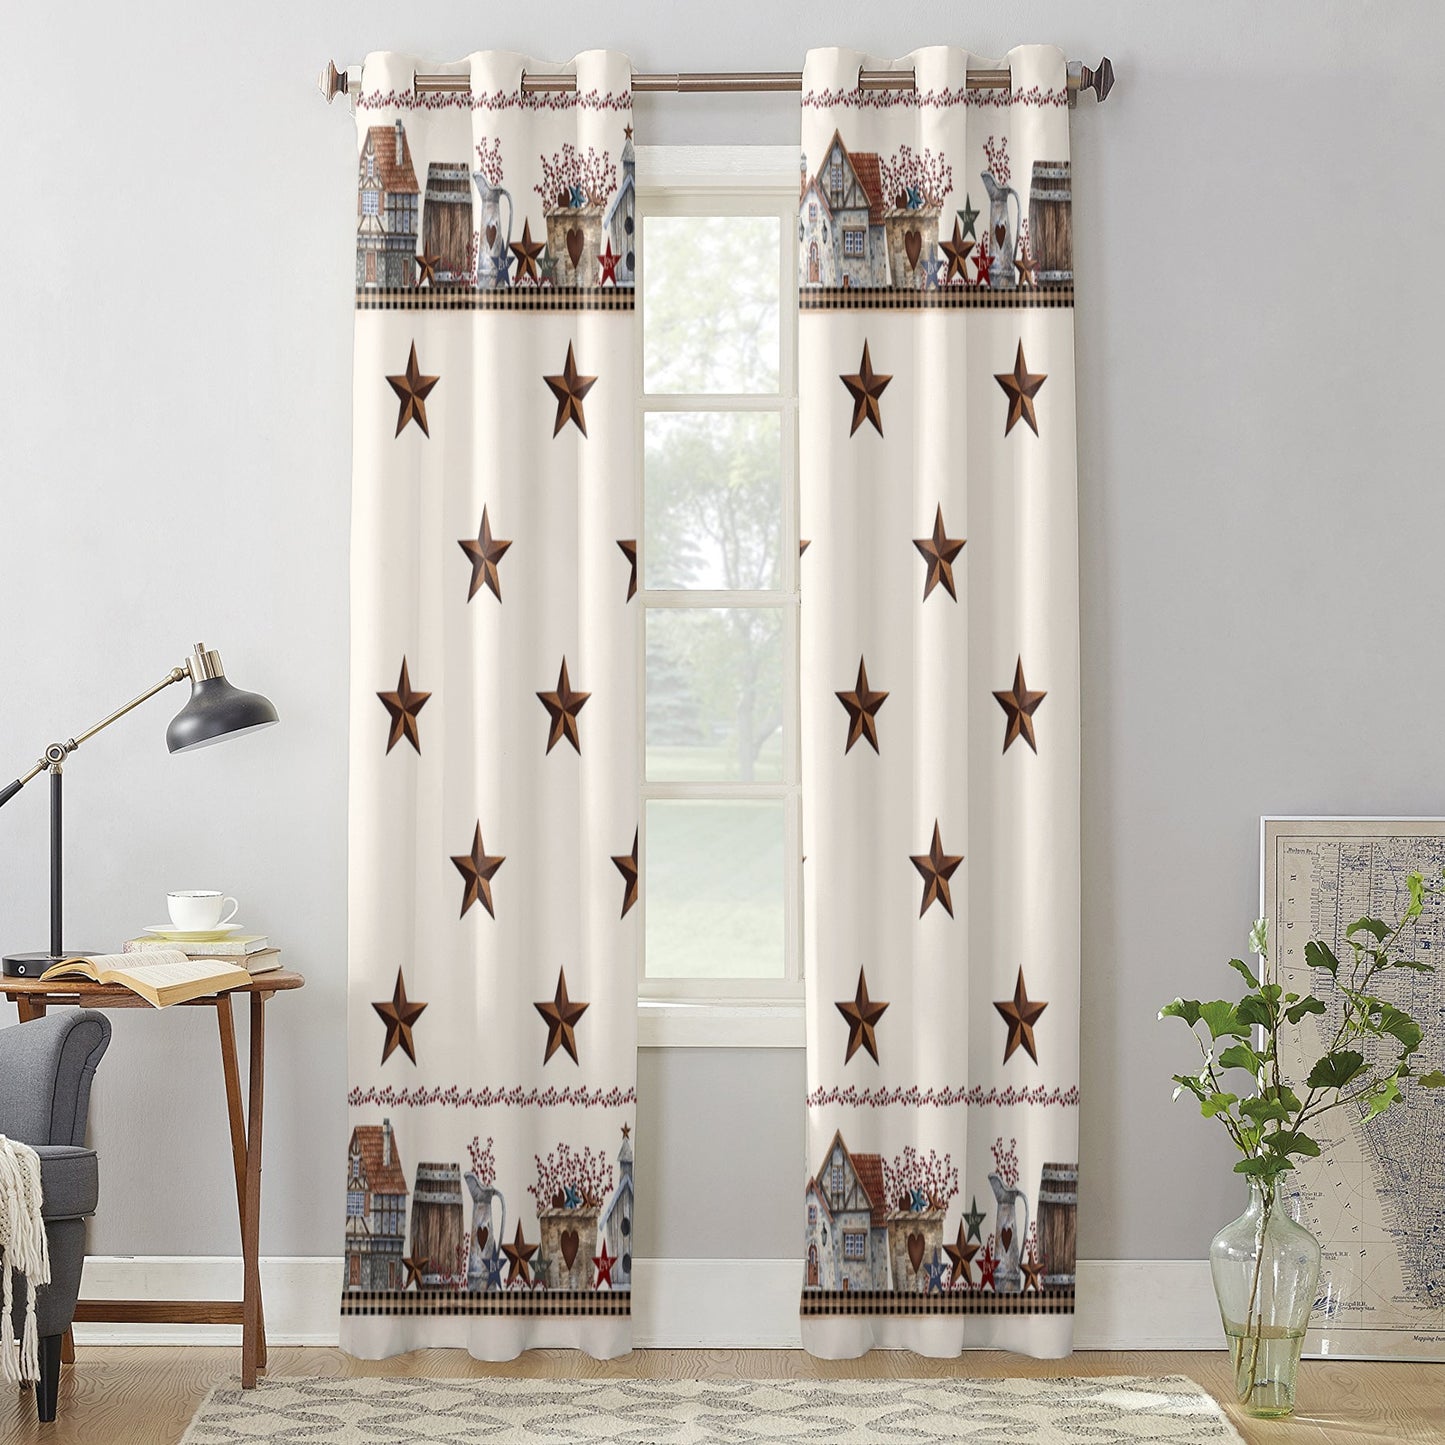 American Country Country Star Farm Window Curtains Kitchen Bedroom Drapes Home Decor Luxury Curtains for Living Room